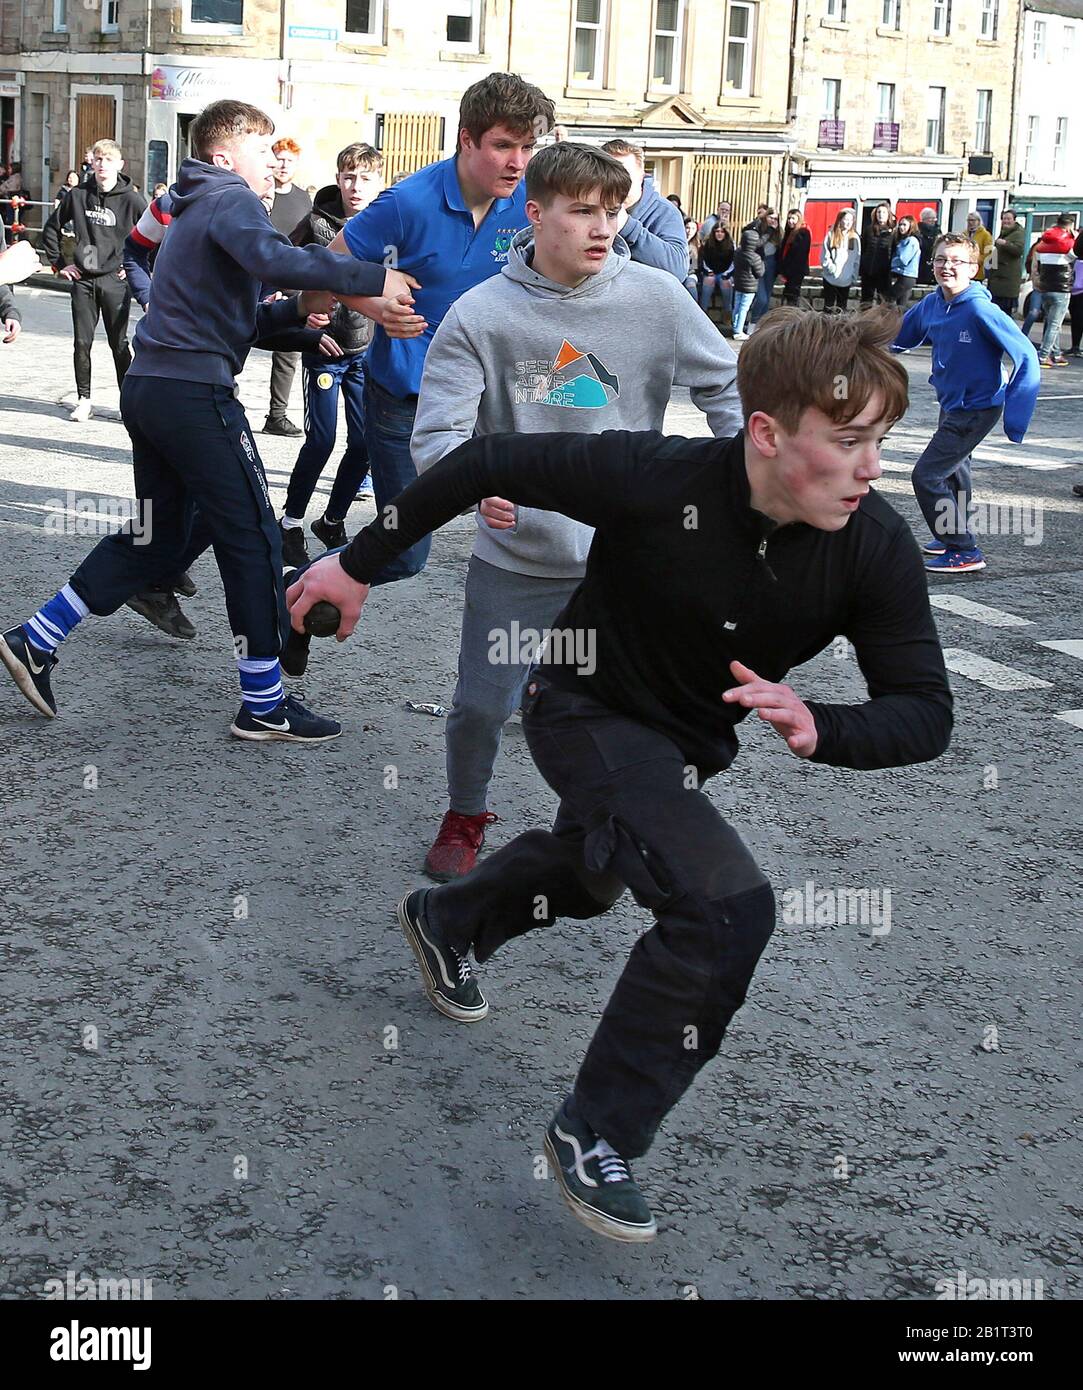 Boys tussle for the leather ball during the annual Jedburgh ba' game event on Jedburgh's High Street in the Scottish Borders. Picture date: Thursday February 27, 2020. The annual event started in the 1700s and the first ever game was supposedly played with an Englishman's head. It involves two teams, the Uppies (residents from the higher part of Jedburgh) and the Doonies (residents from the lower part of Jedburgh) getting the ball to either the top or bottom of the town. The ball, which is made of leather, stuffed with straw and decorated with ribbons representing hair, is thrown into the crow Stock Photo